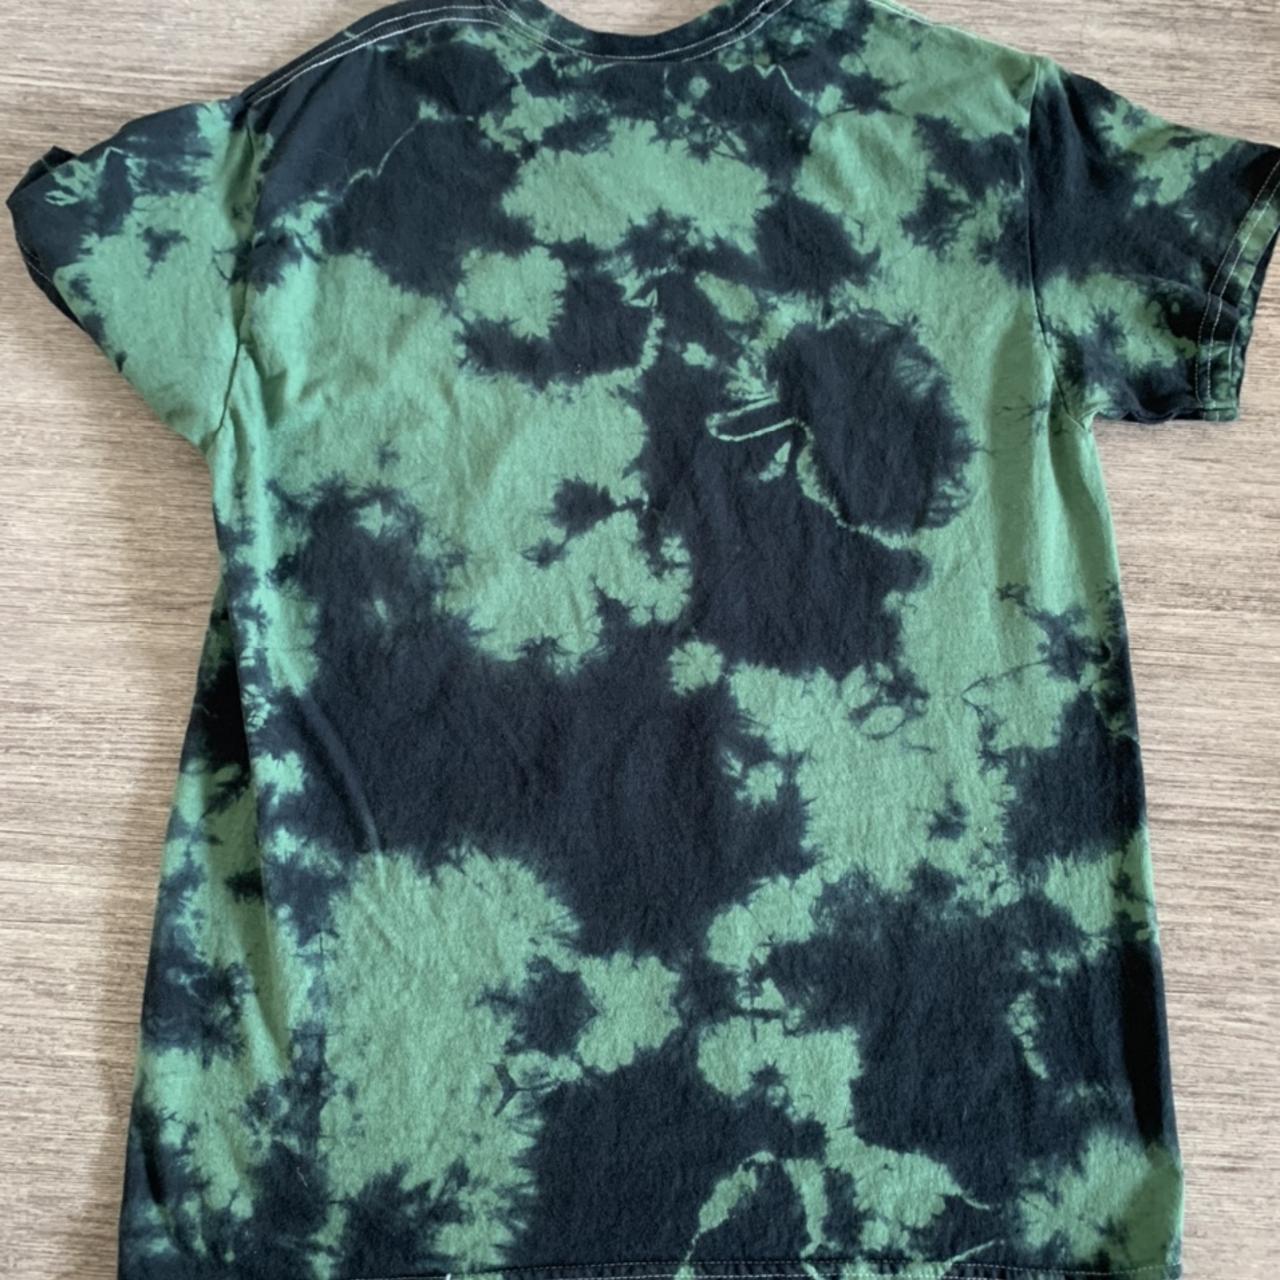 Camo Tie-Dye “Hippie Funk” T-Shirt – Special Order Only